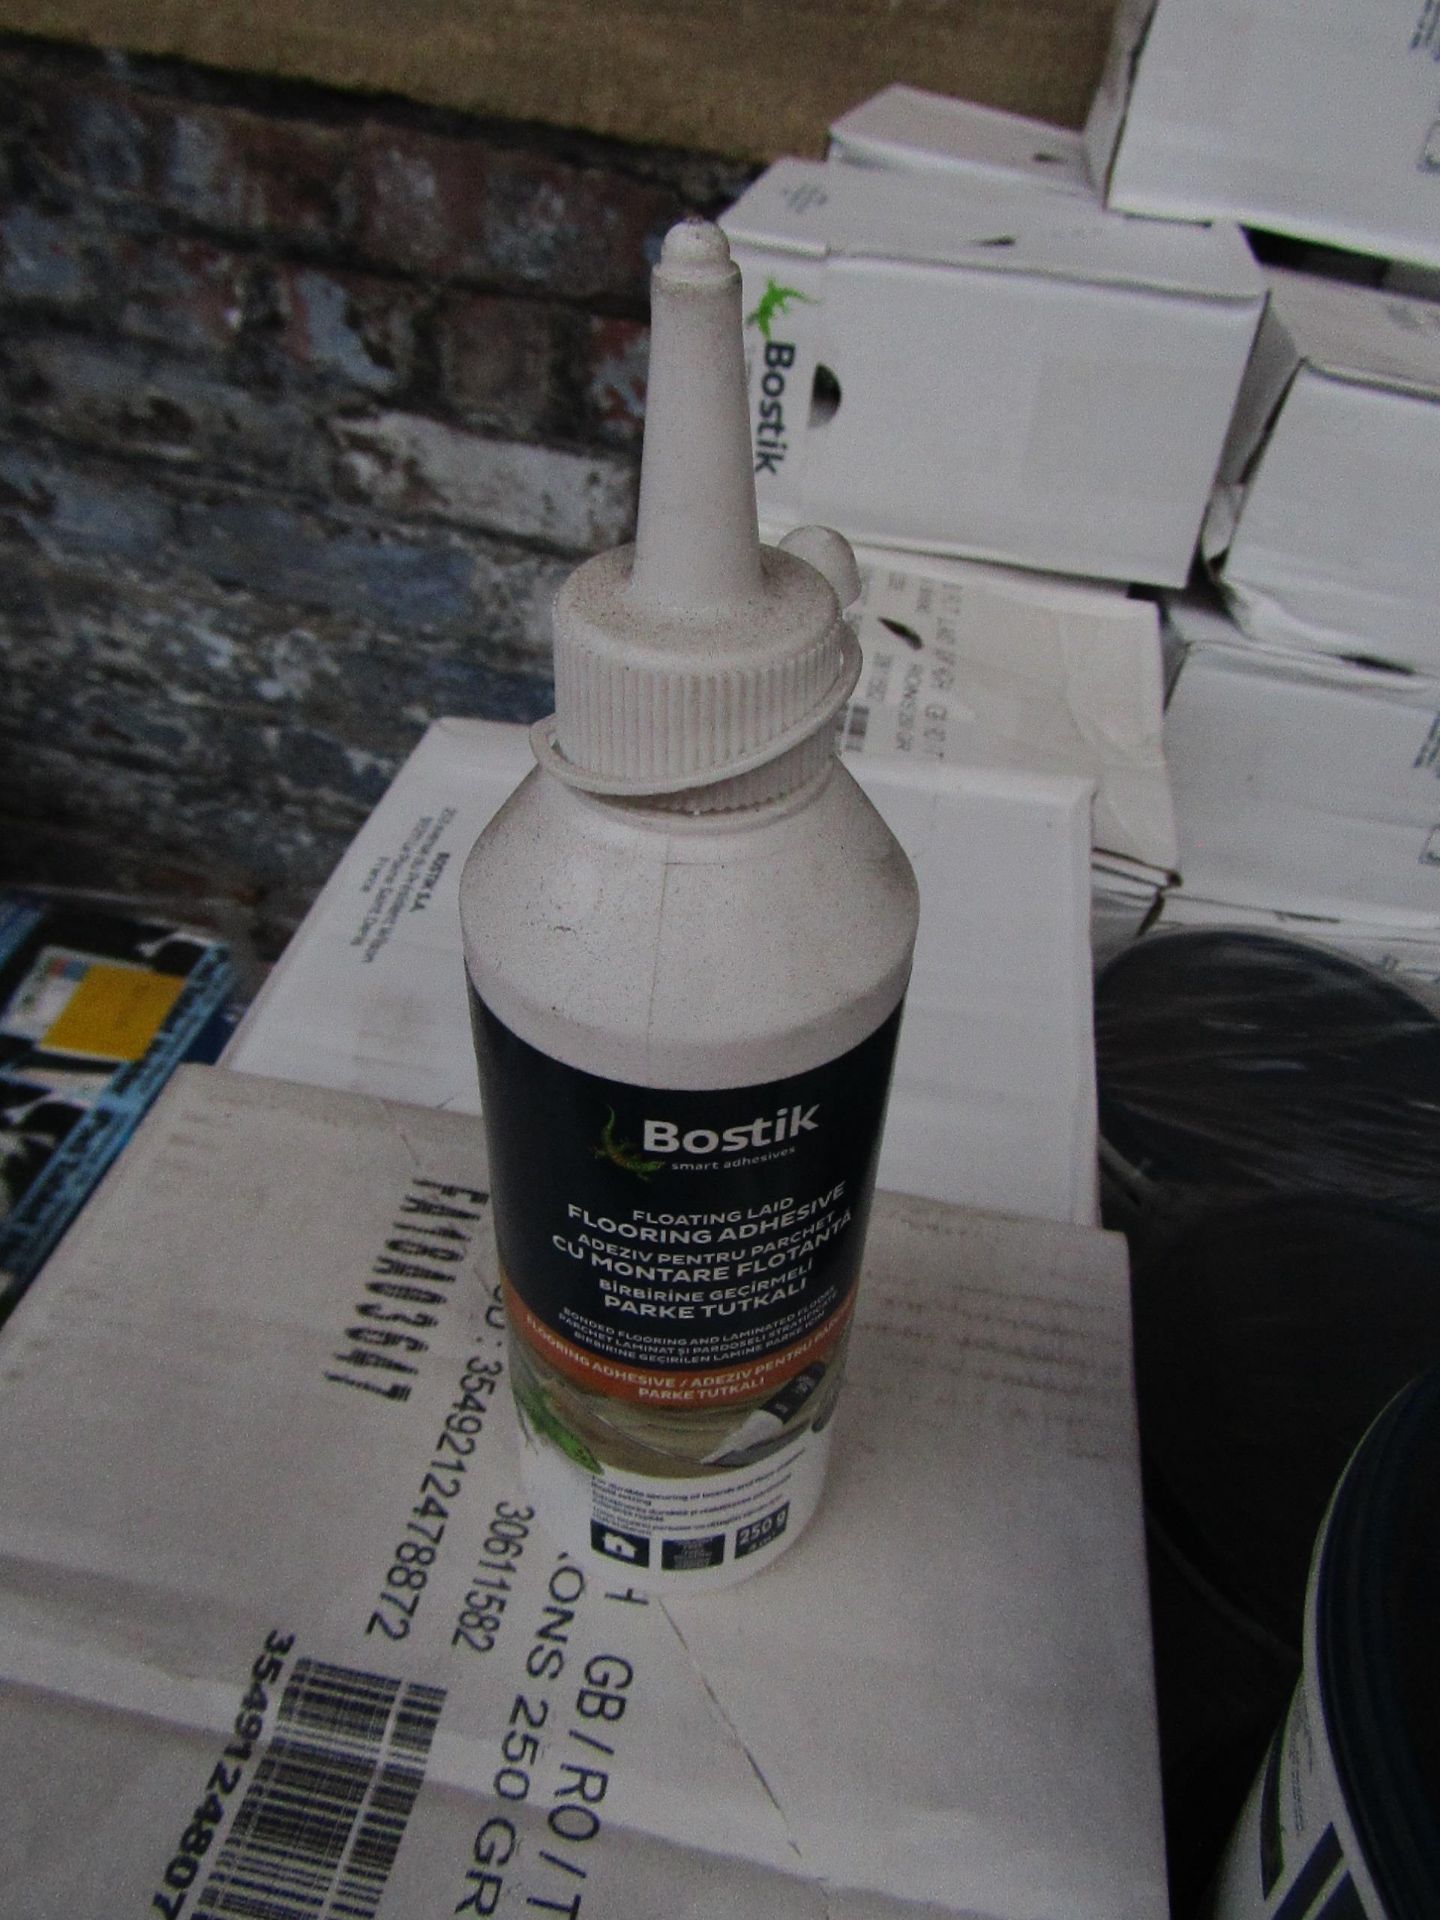 Box of 6x 250g bottles of Bostik Laminate floor adhesive, new and still sealed